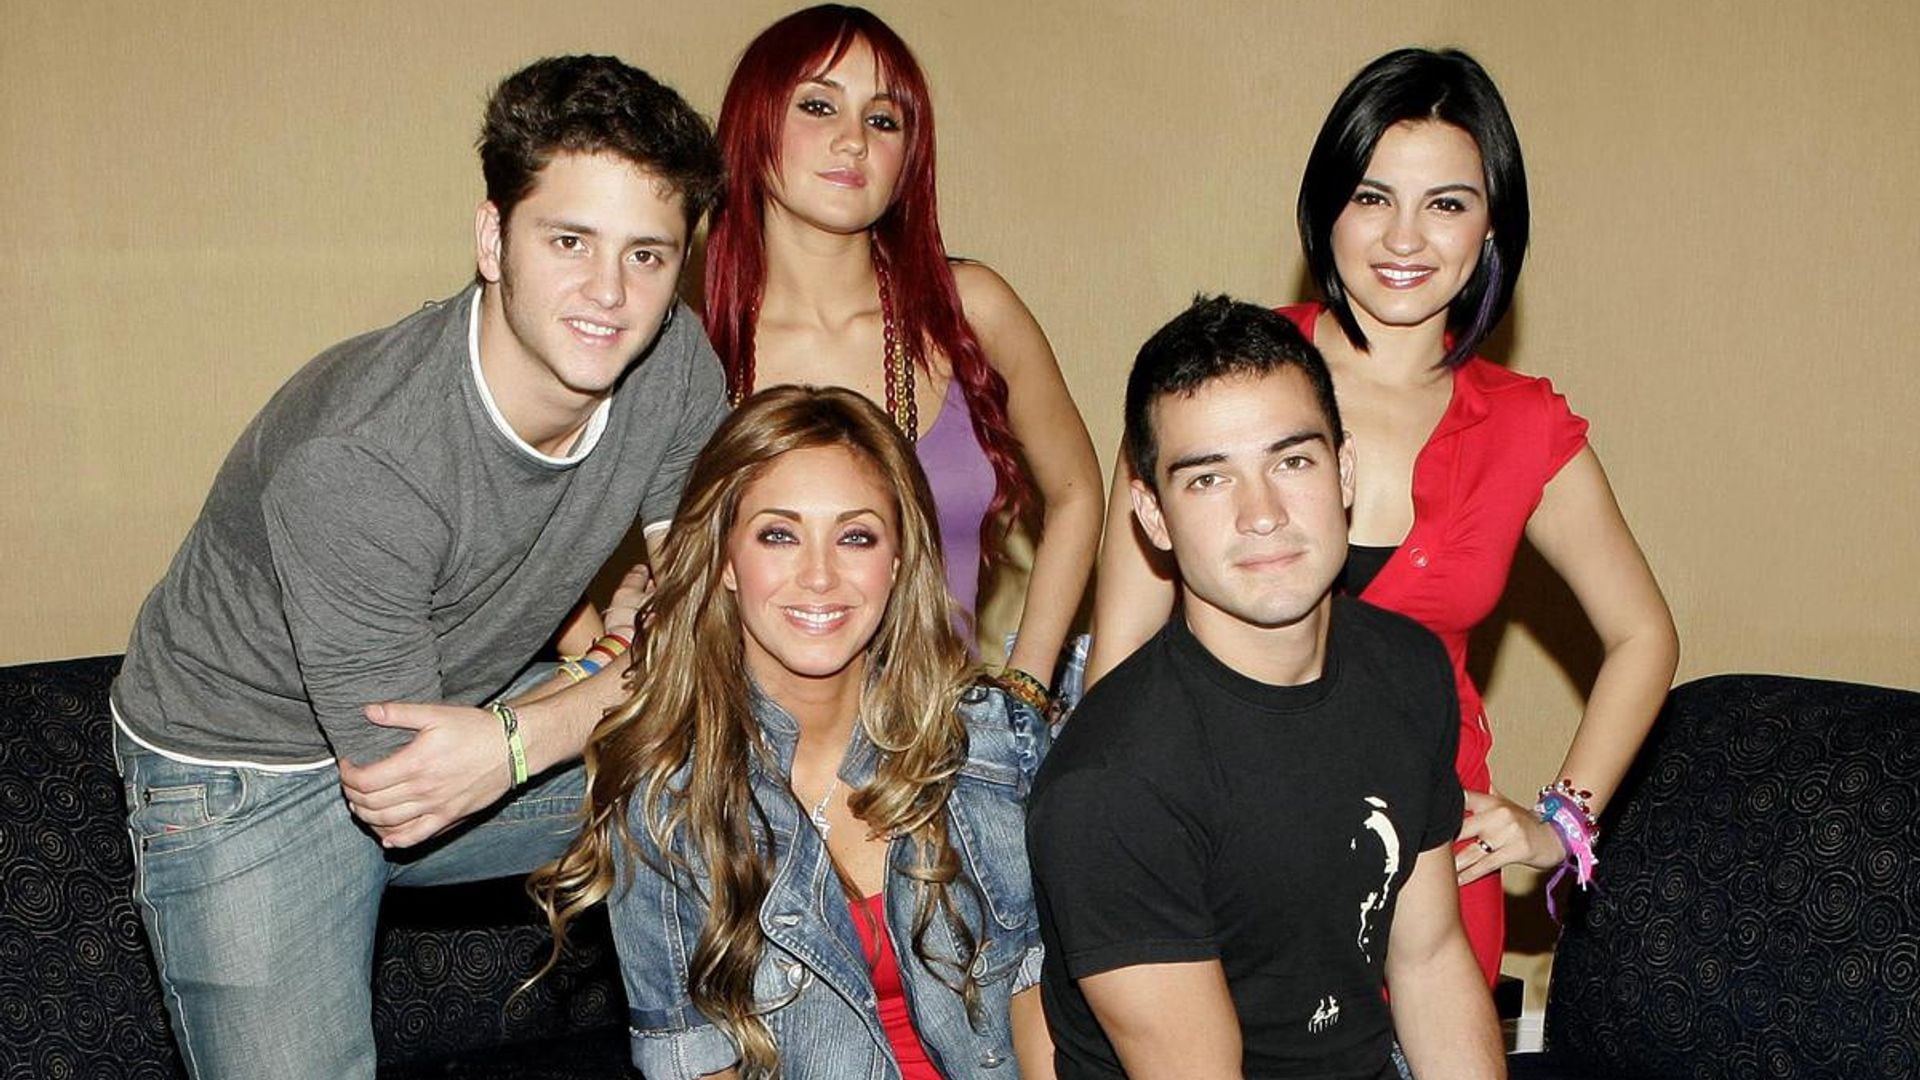 RBD is back! Check out the full setlist for their first concert﻿ in 15 years